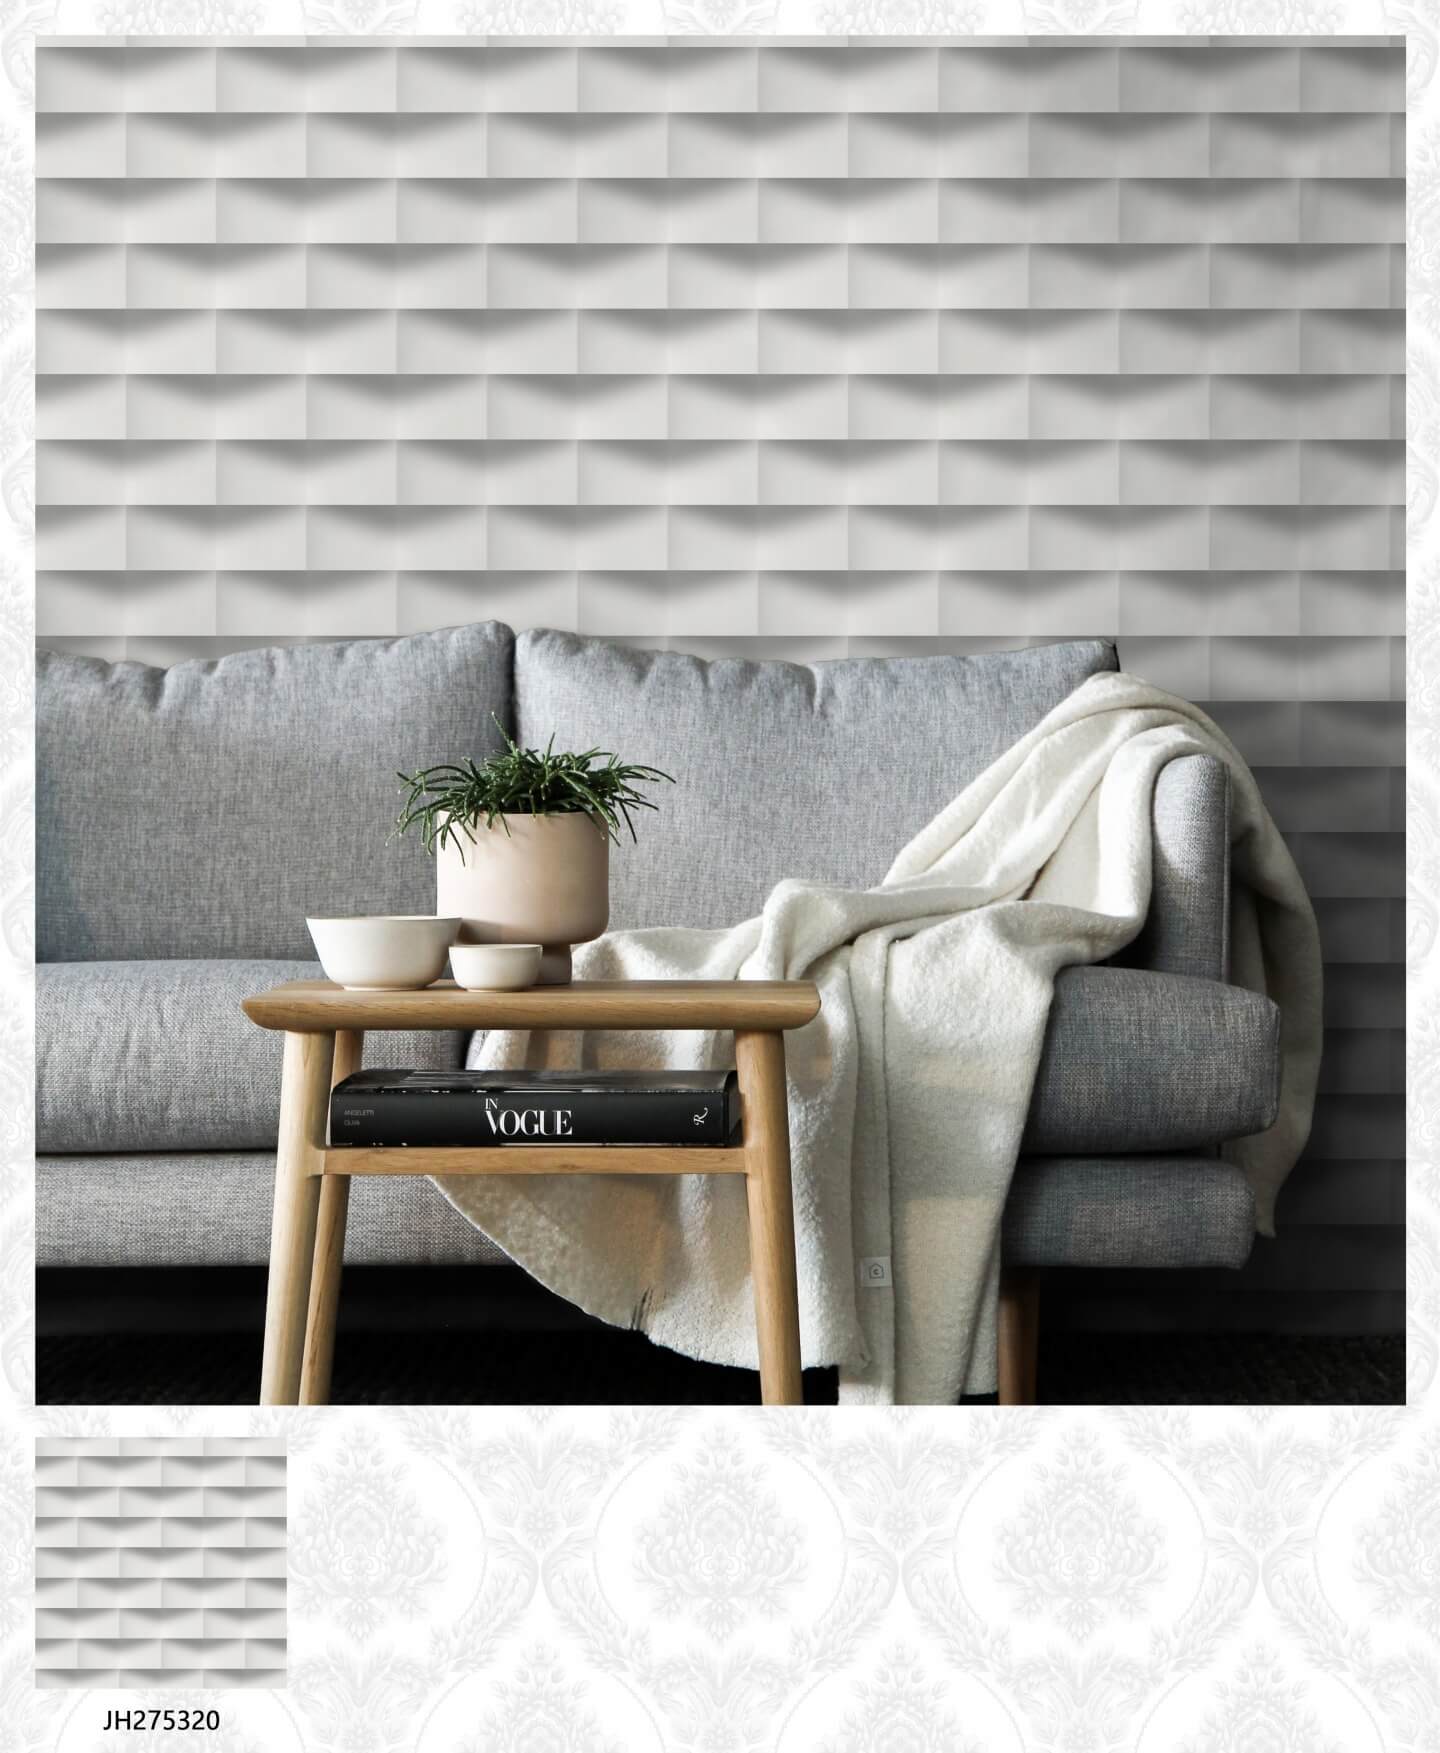 3D Design, Modern Room D&eacute;cor Wallpaper PVC Wallpapers for Living Areas, Wooden Brown Wall Interior Wallpapers (4)